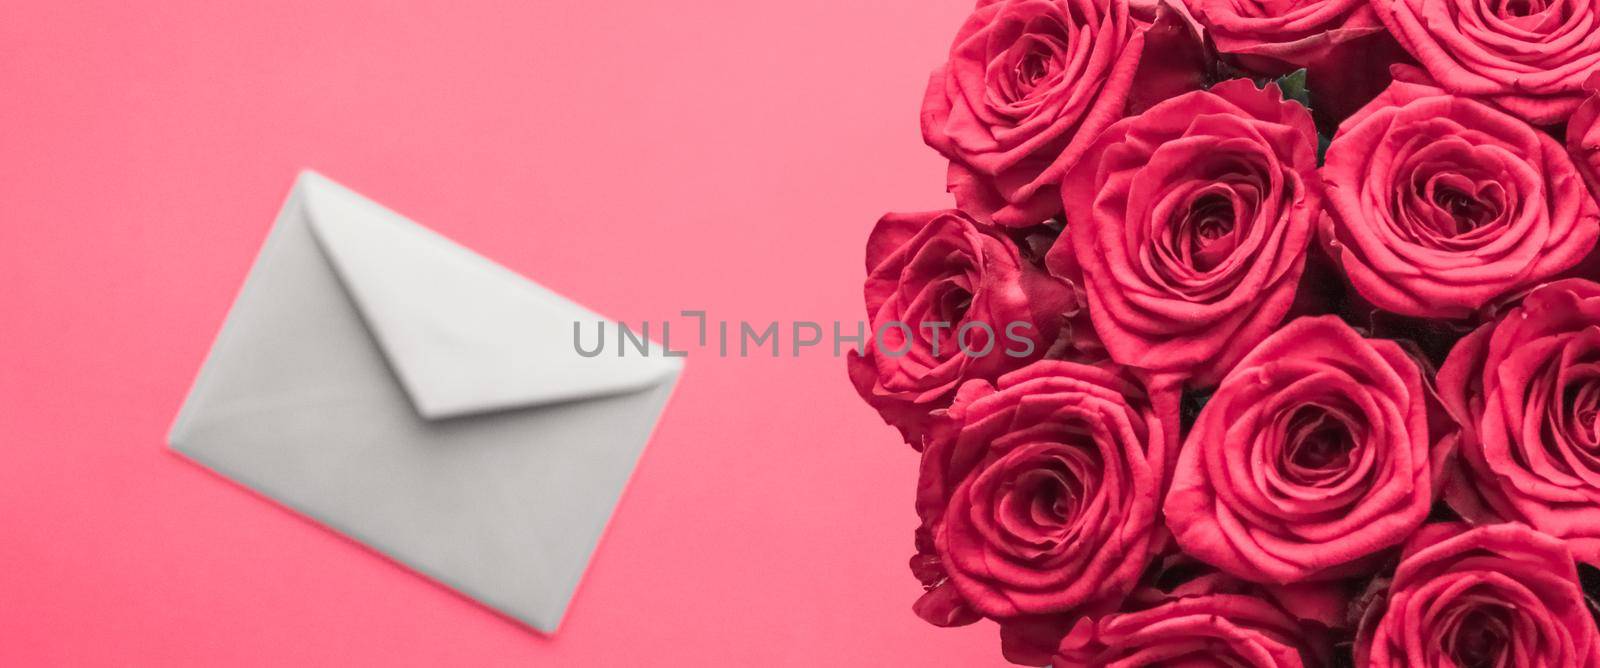 Holidays gift, floral present and happy relationship concept - Love letter and flowers delivery on Valentines Day, luxury bouquet of roses and card on pink background for romantic holiday design